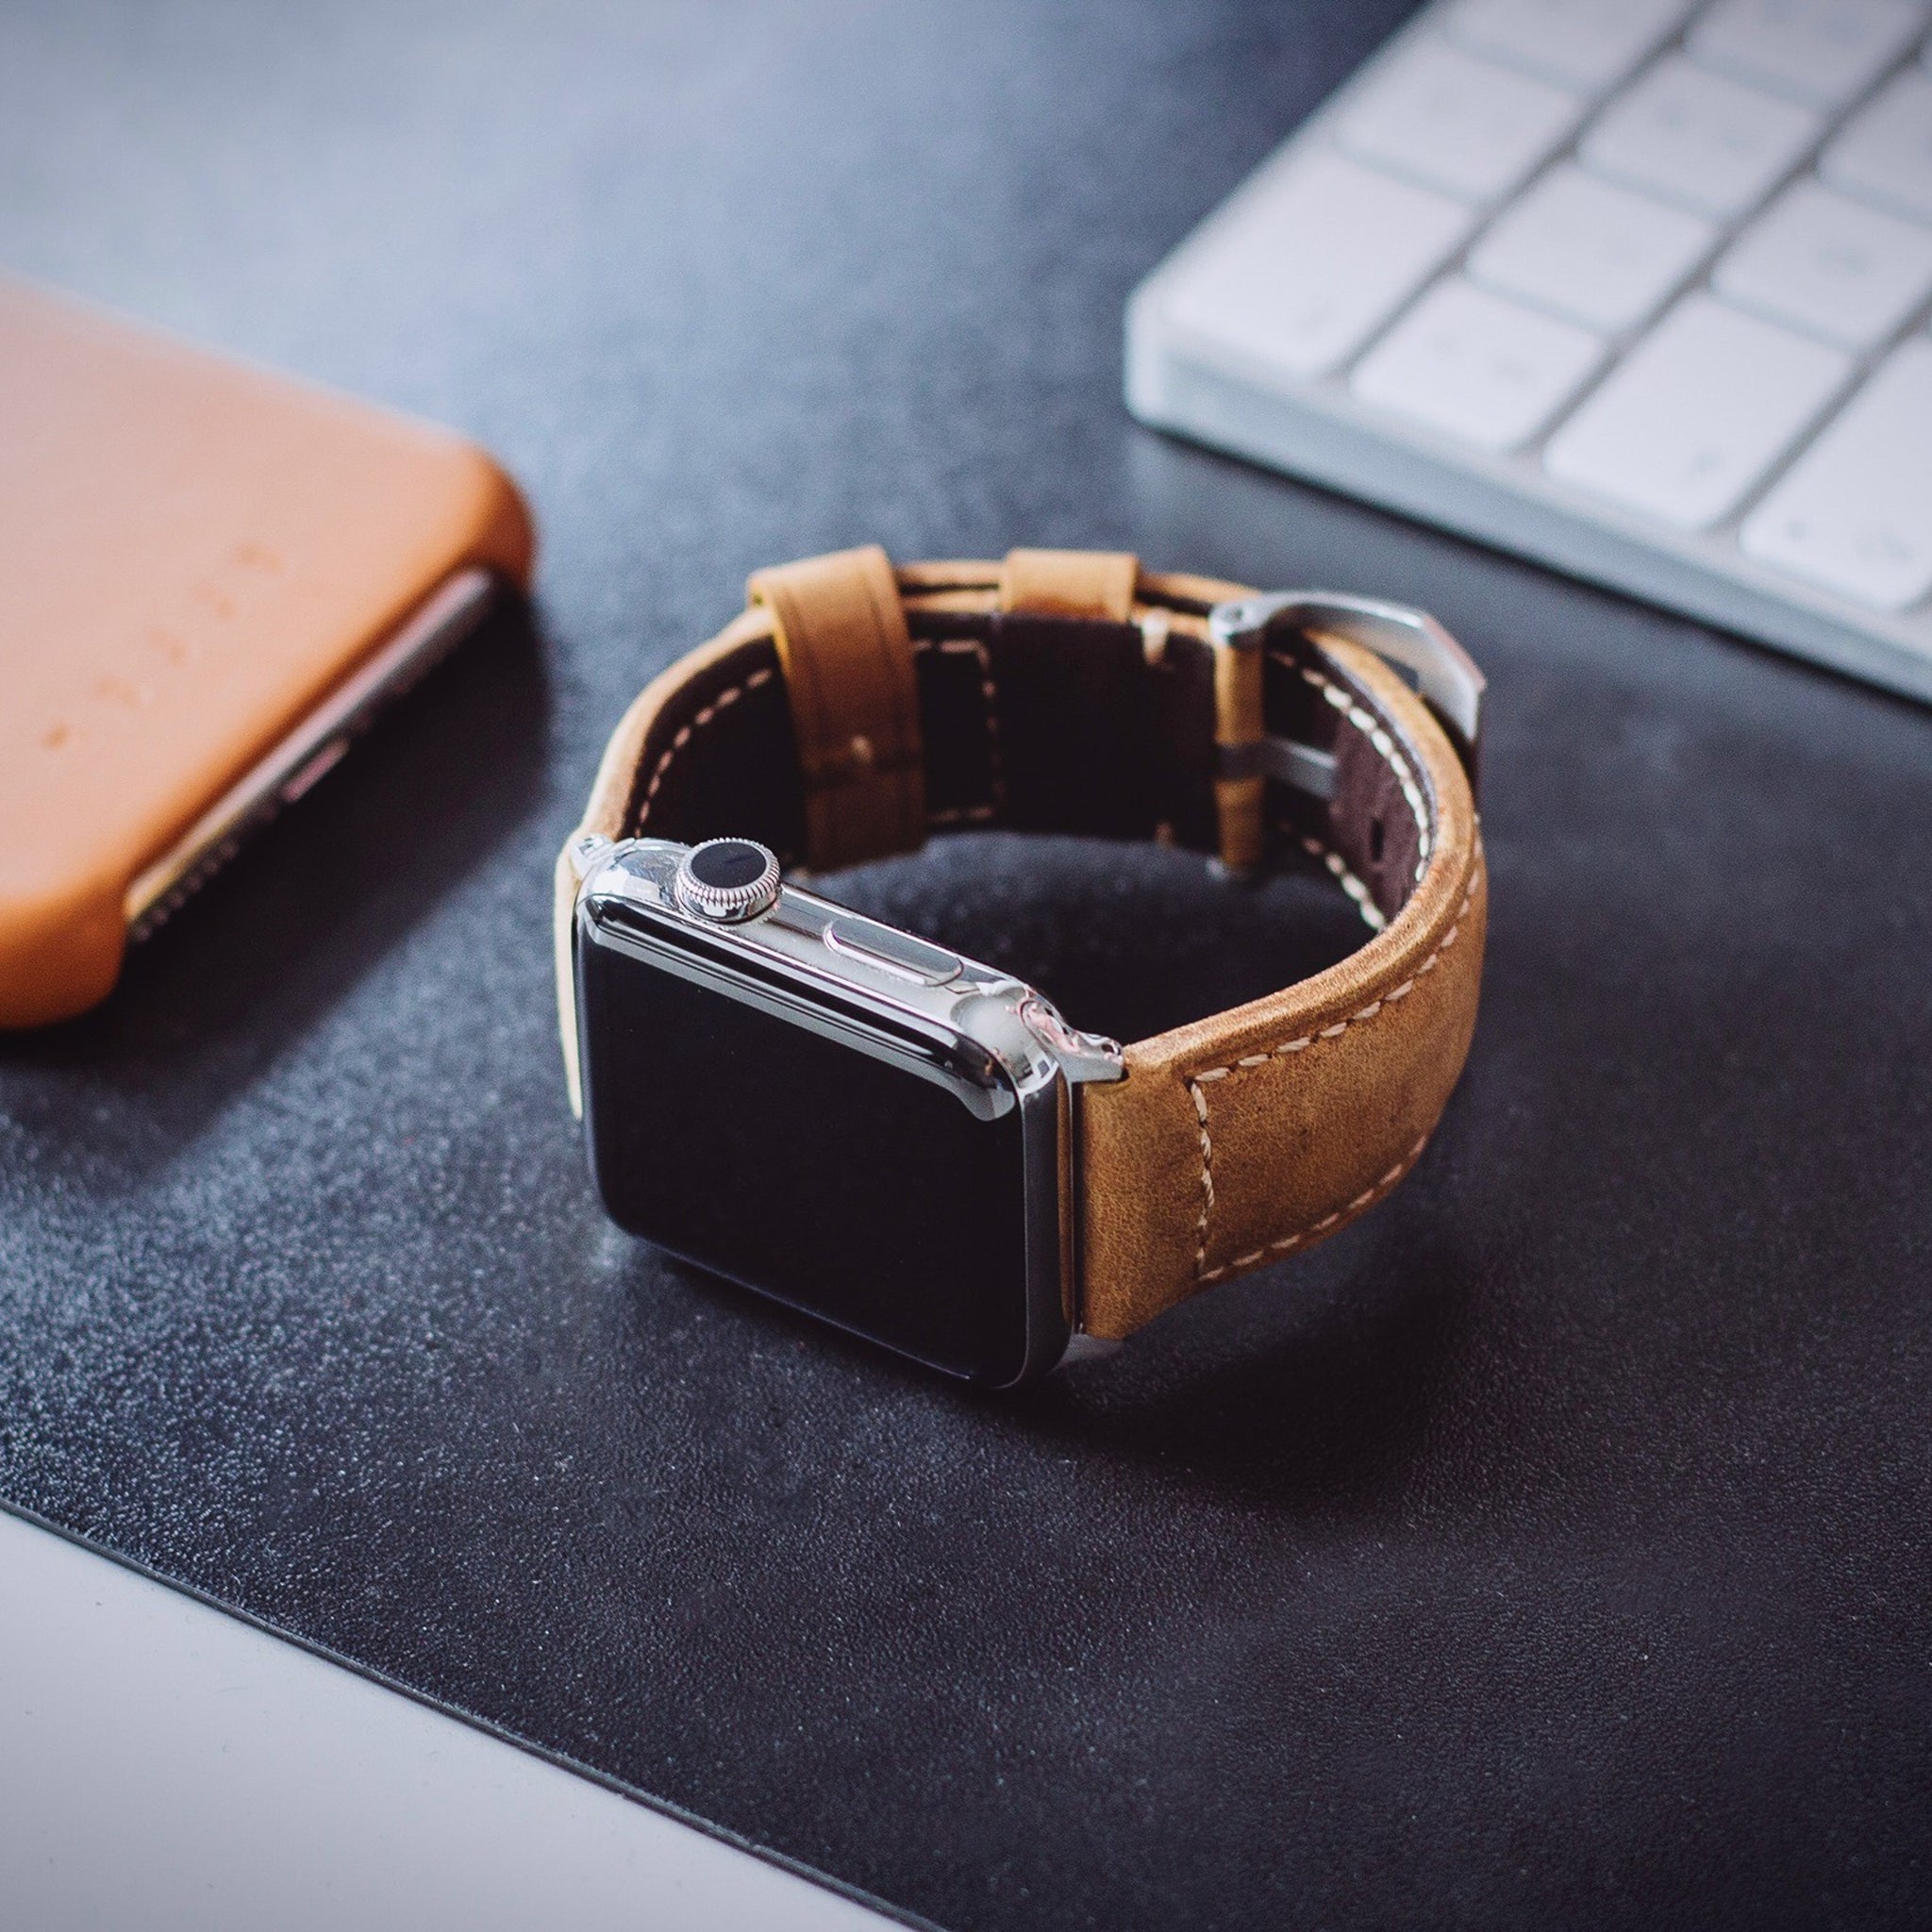 Leather Apple Watch Strap - Classic by Bullstrap